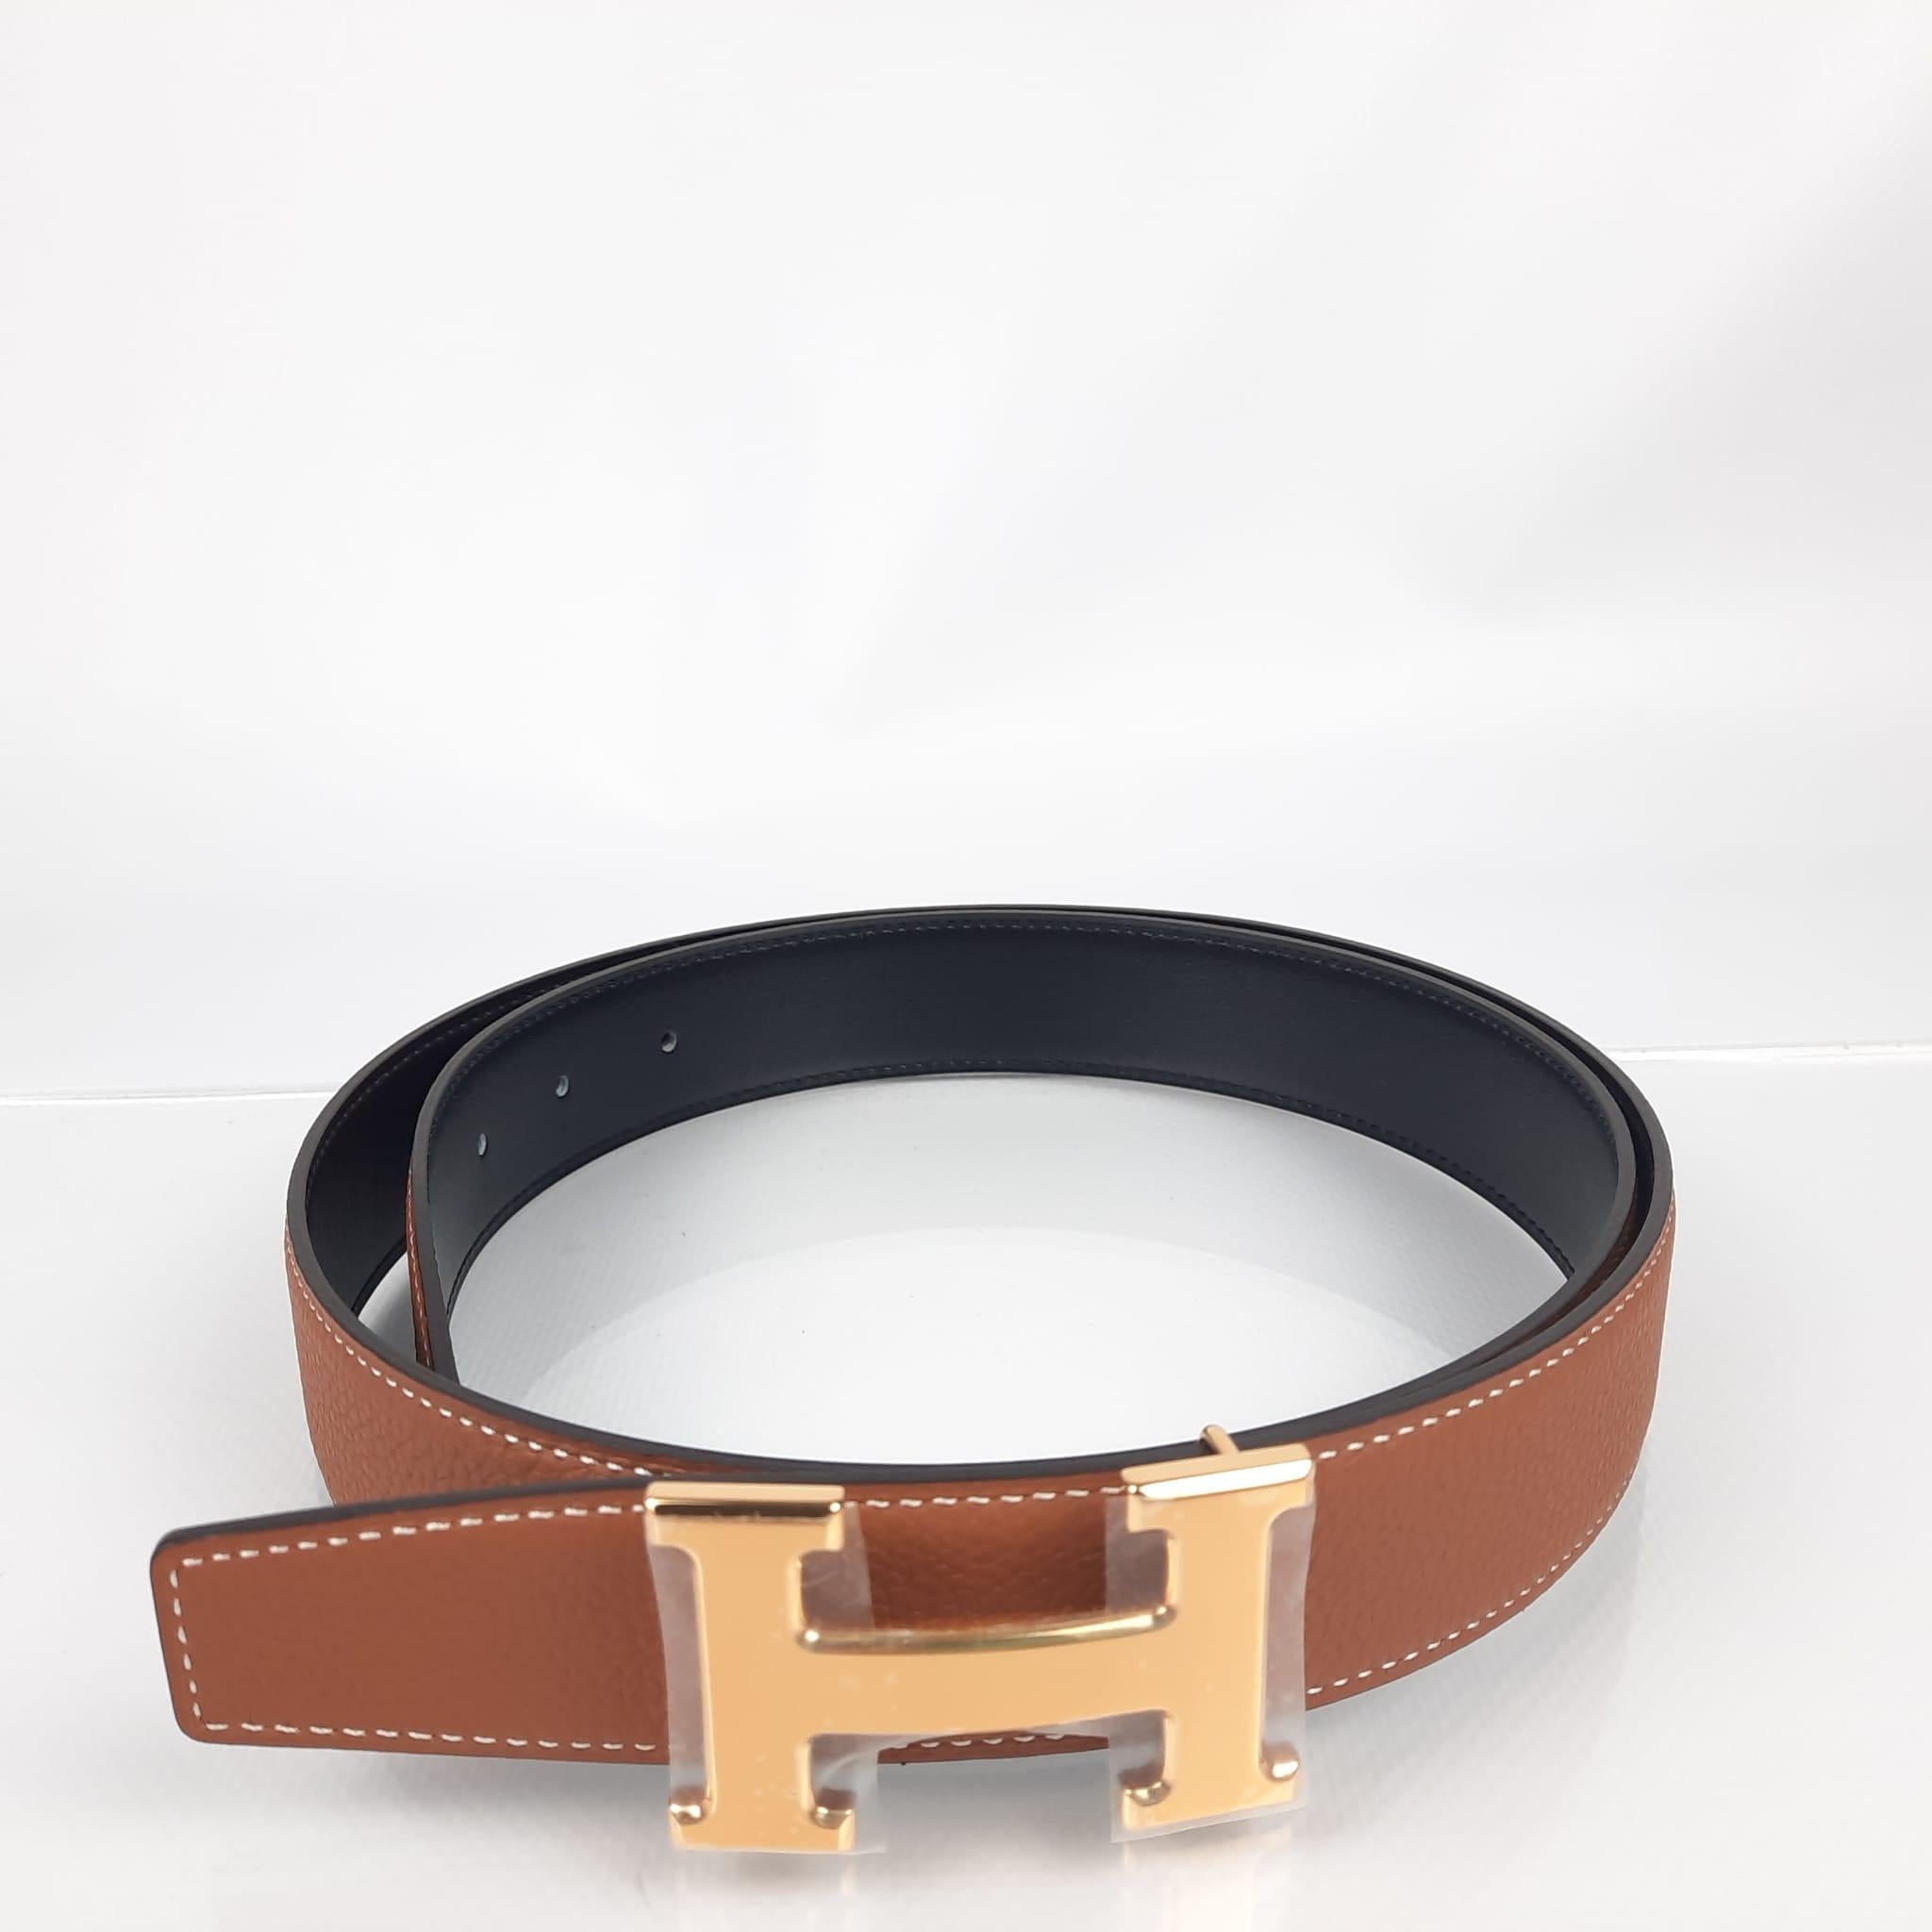 Size 95
Buckle in brushed gold-plated metal.
& Reversible leather strap in Box 135 and Togo calfskin. 